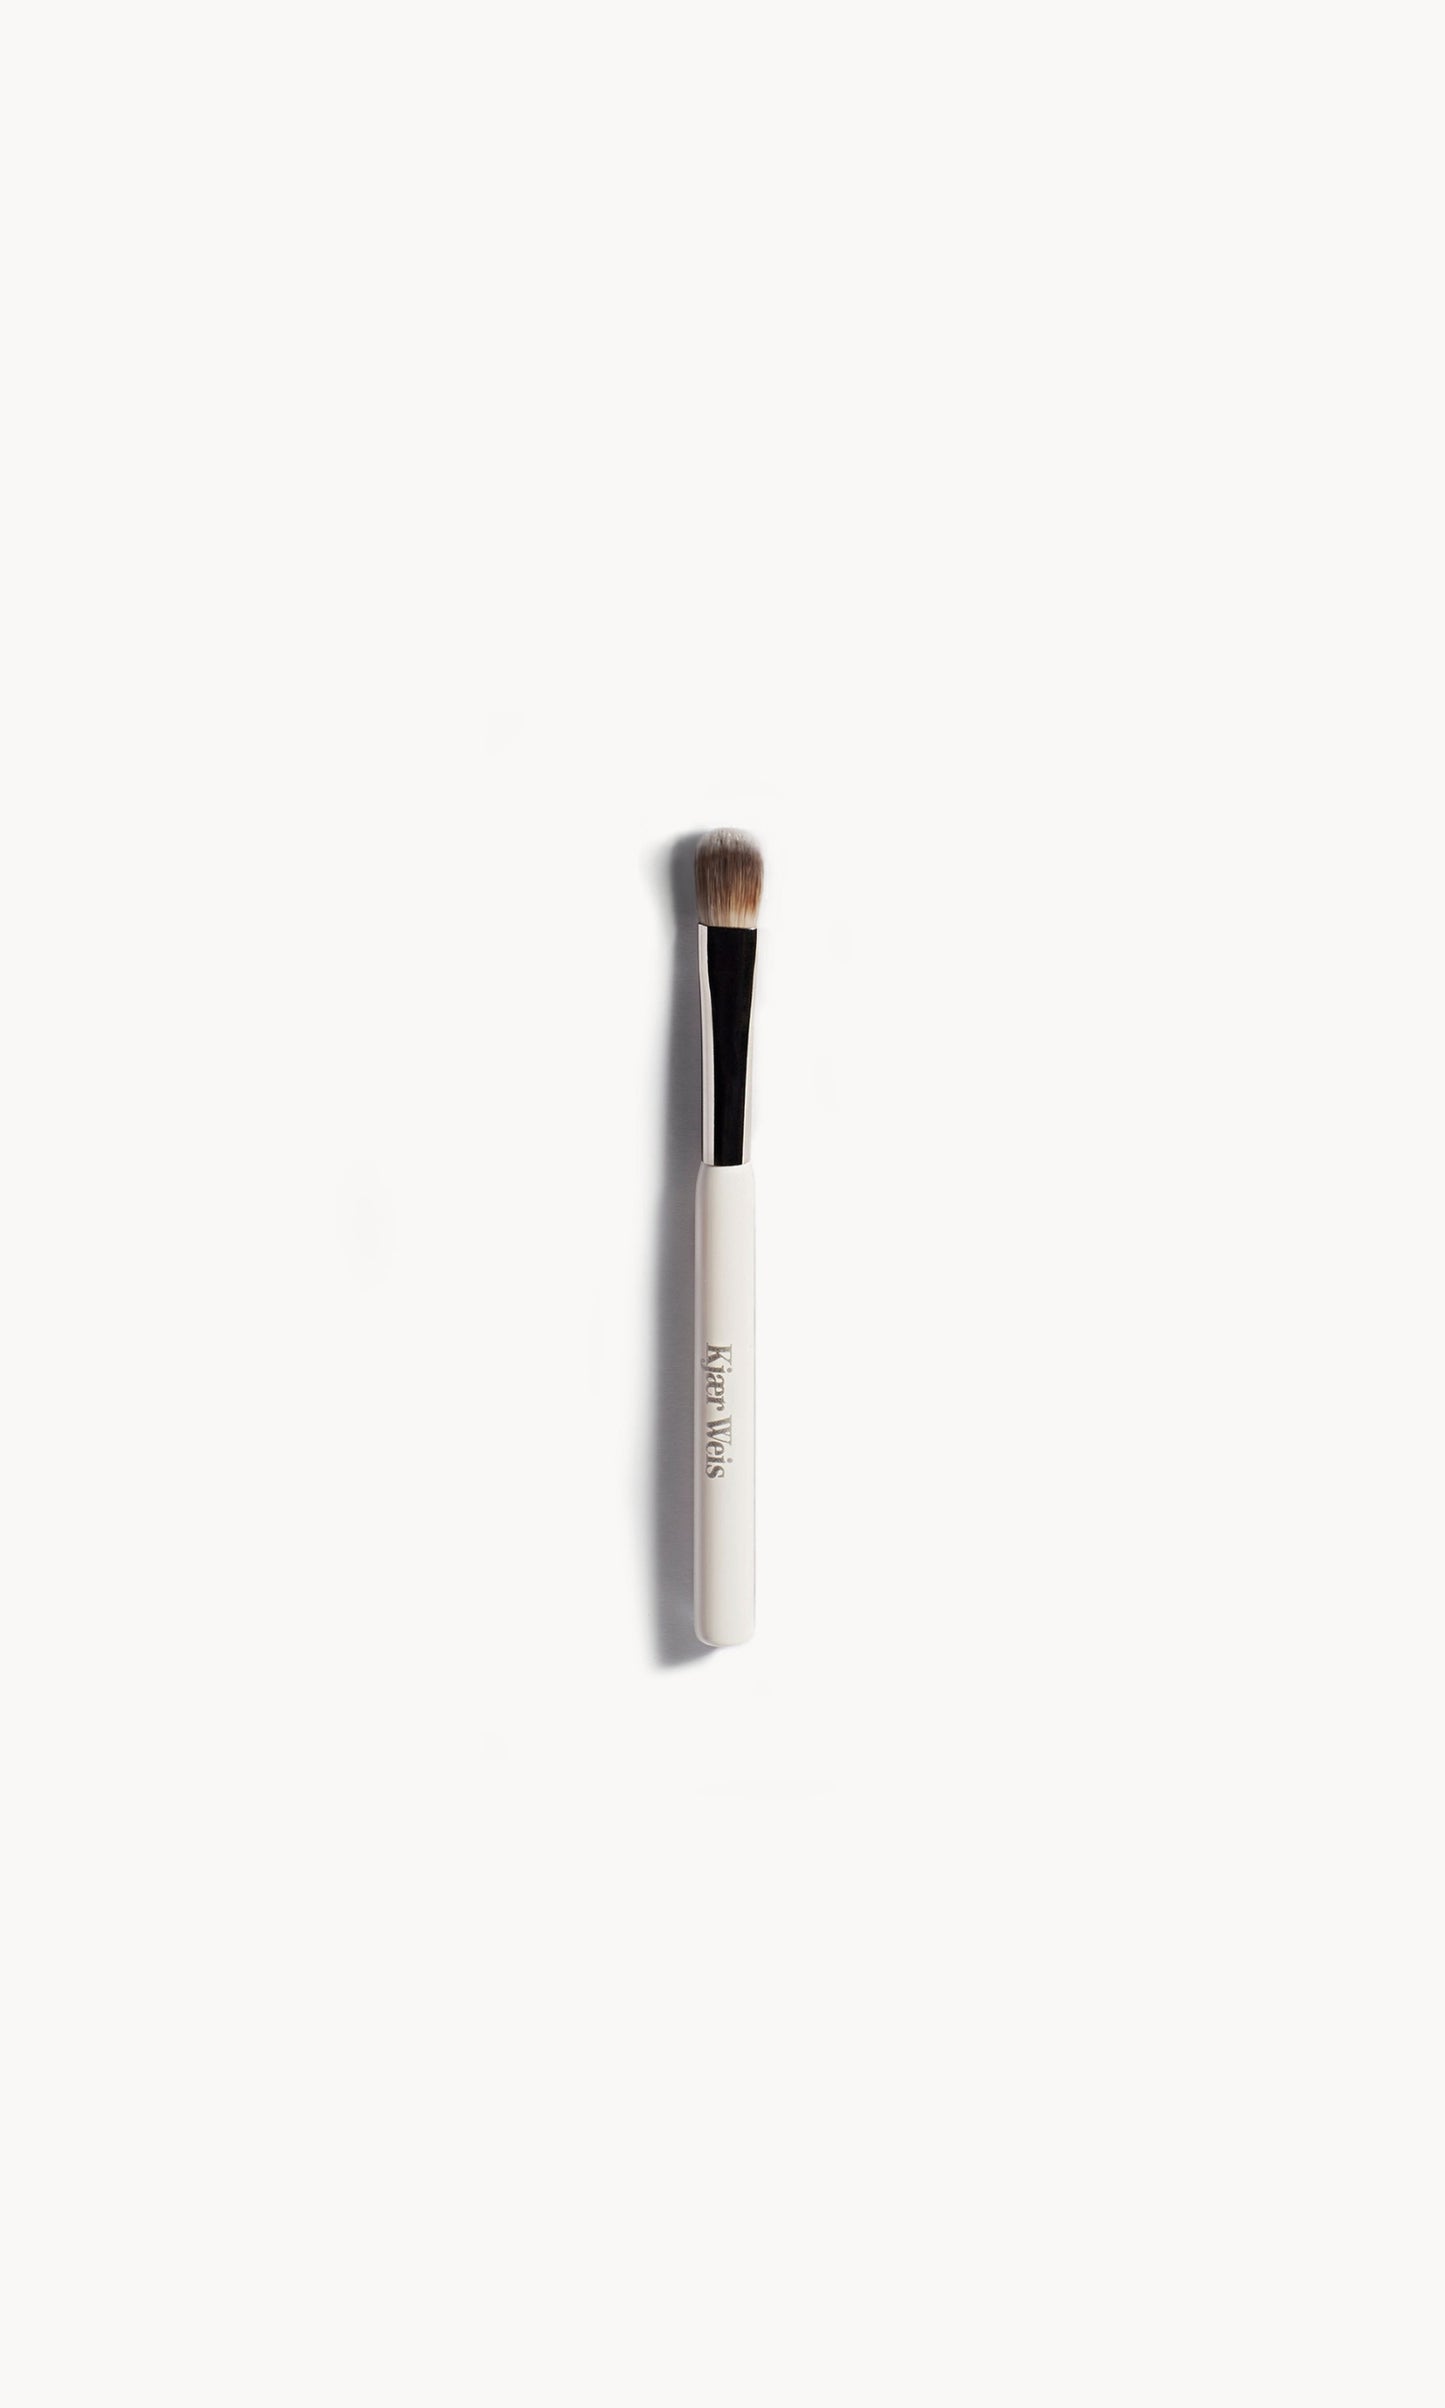 Eye shadow brush lying flat on a white background. The brush has a white and silver handle with brown bristles. 